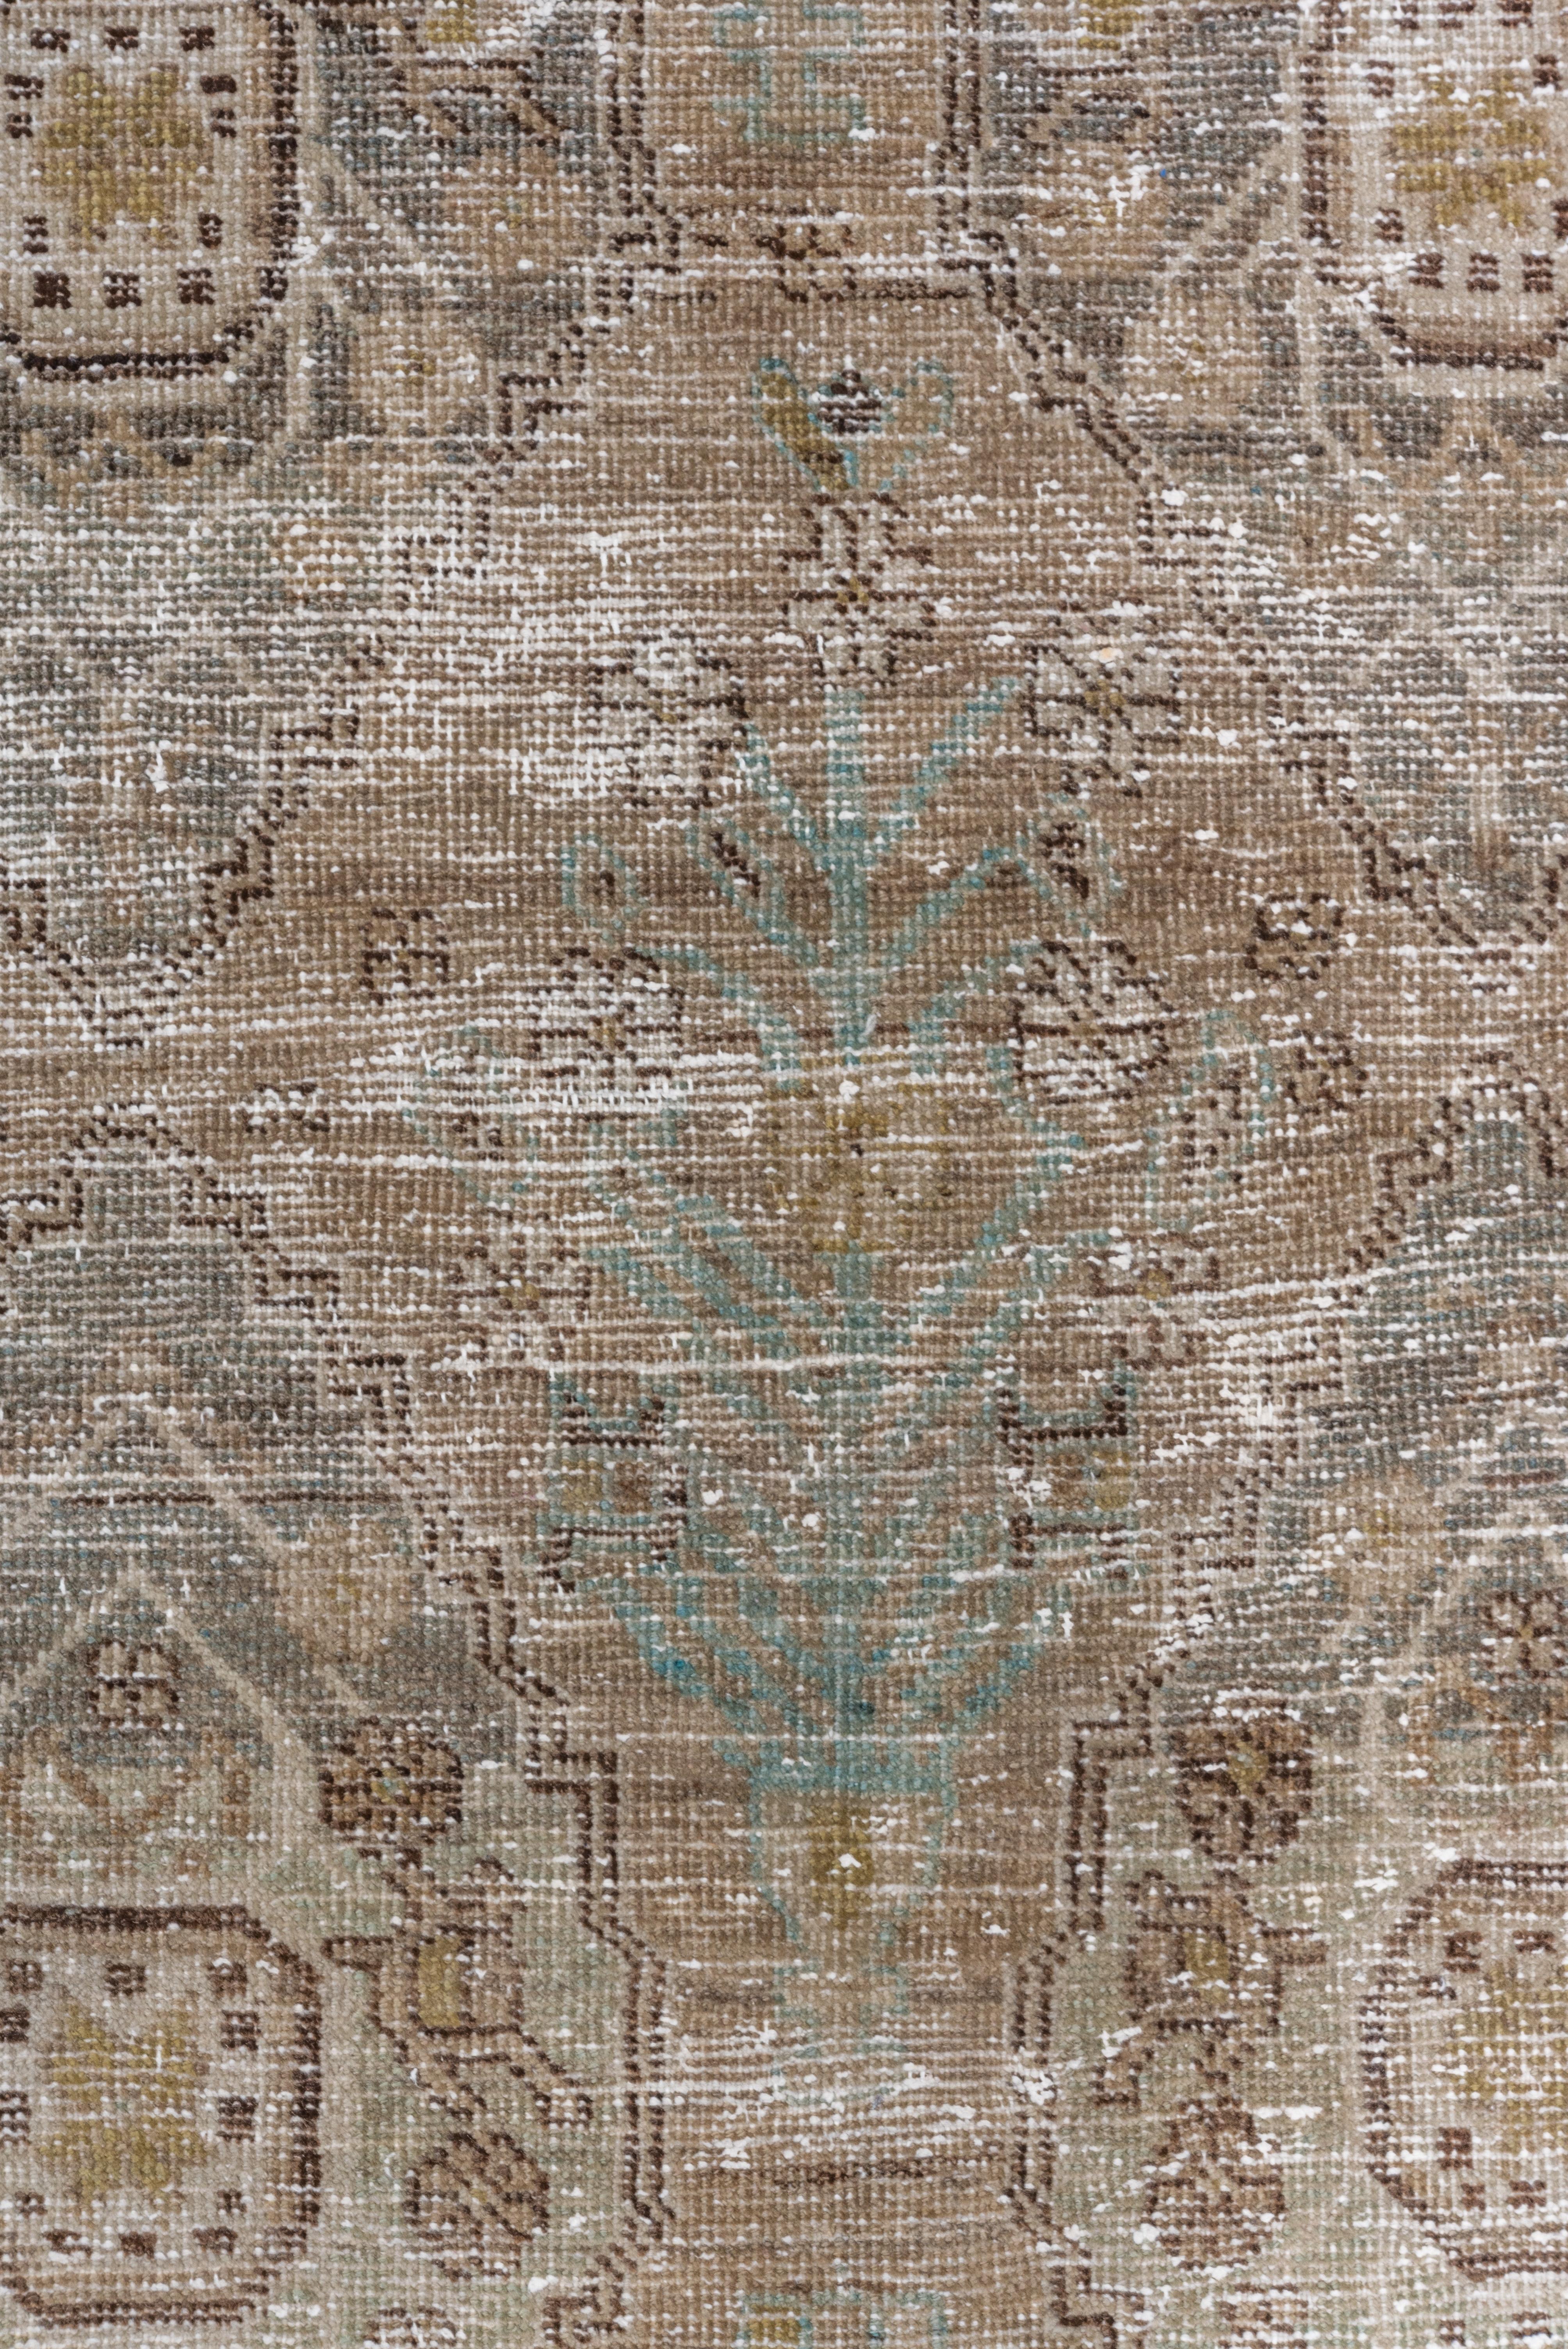 1920s Distressed Antique Turkish Sivas Rug, Earth Tones, Light Blue Accents In Good Condition For Sale In New York, NY